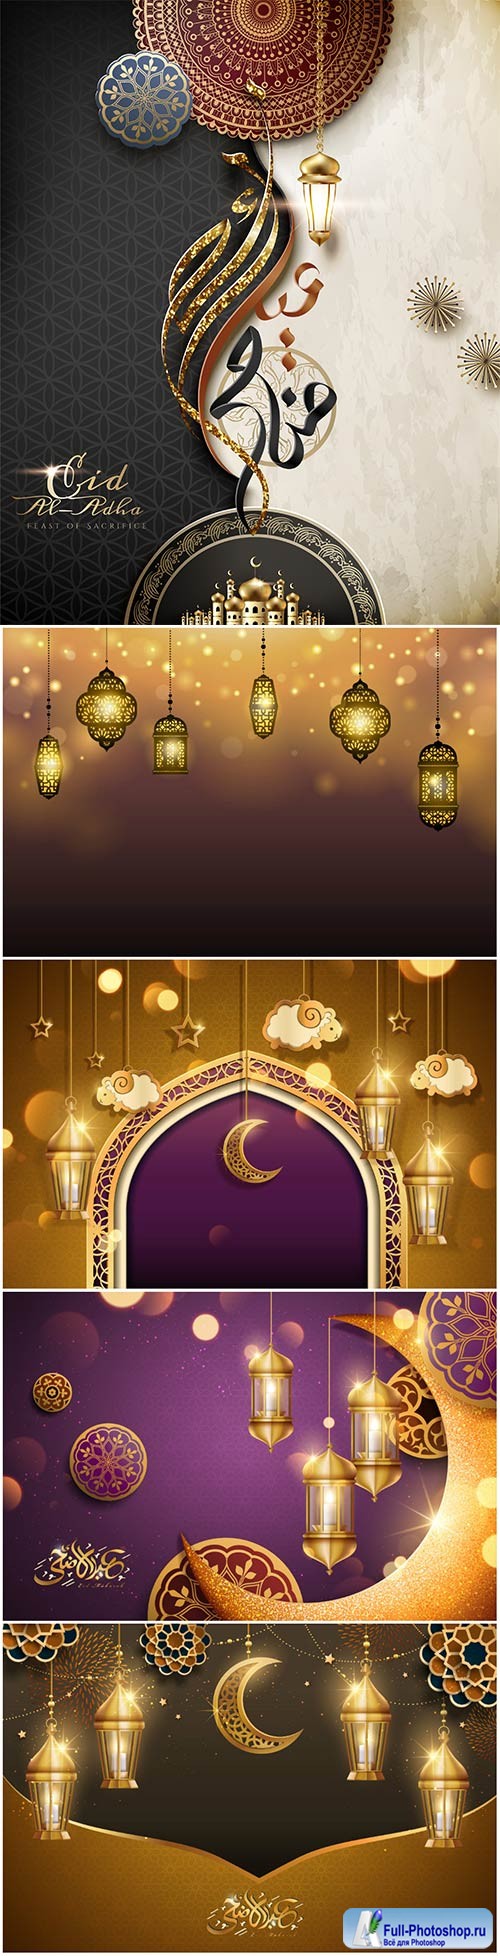 Eid al adha greeting vector design,  golden crescent with floral pattern